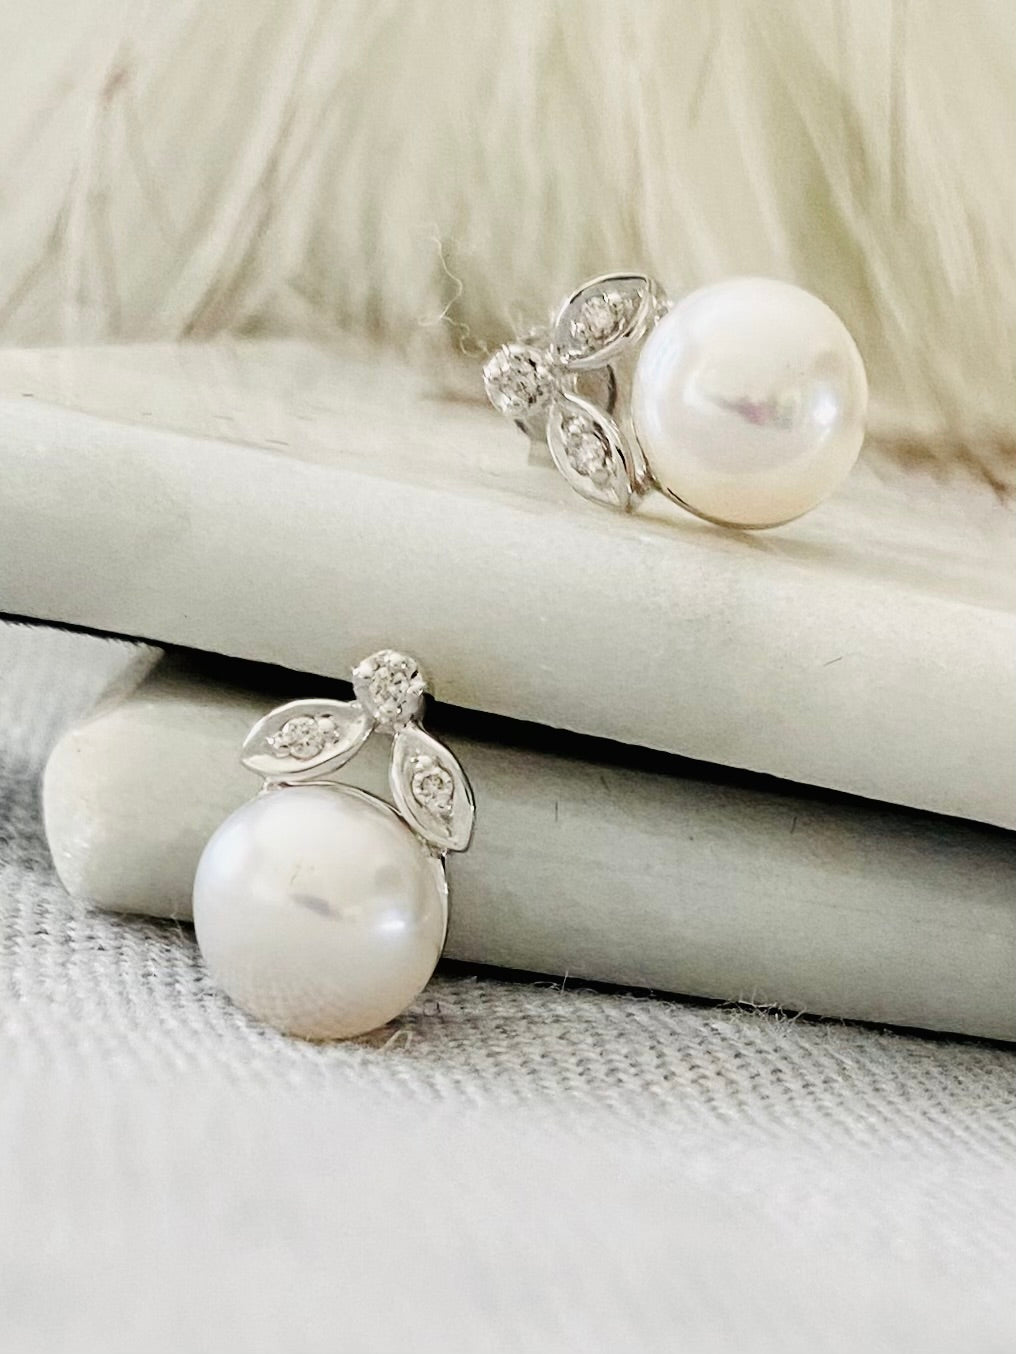 Pearl Pendant and Earring Set